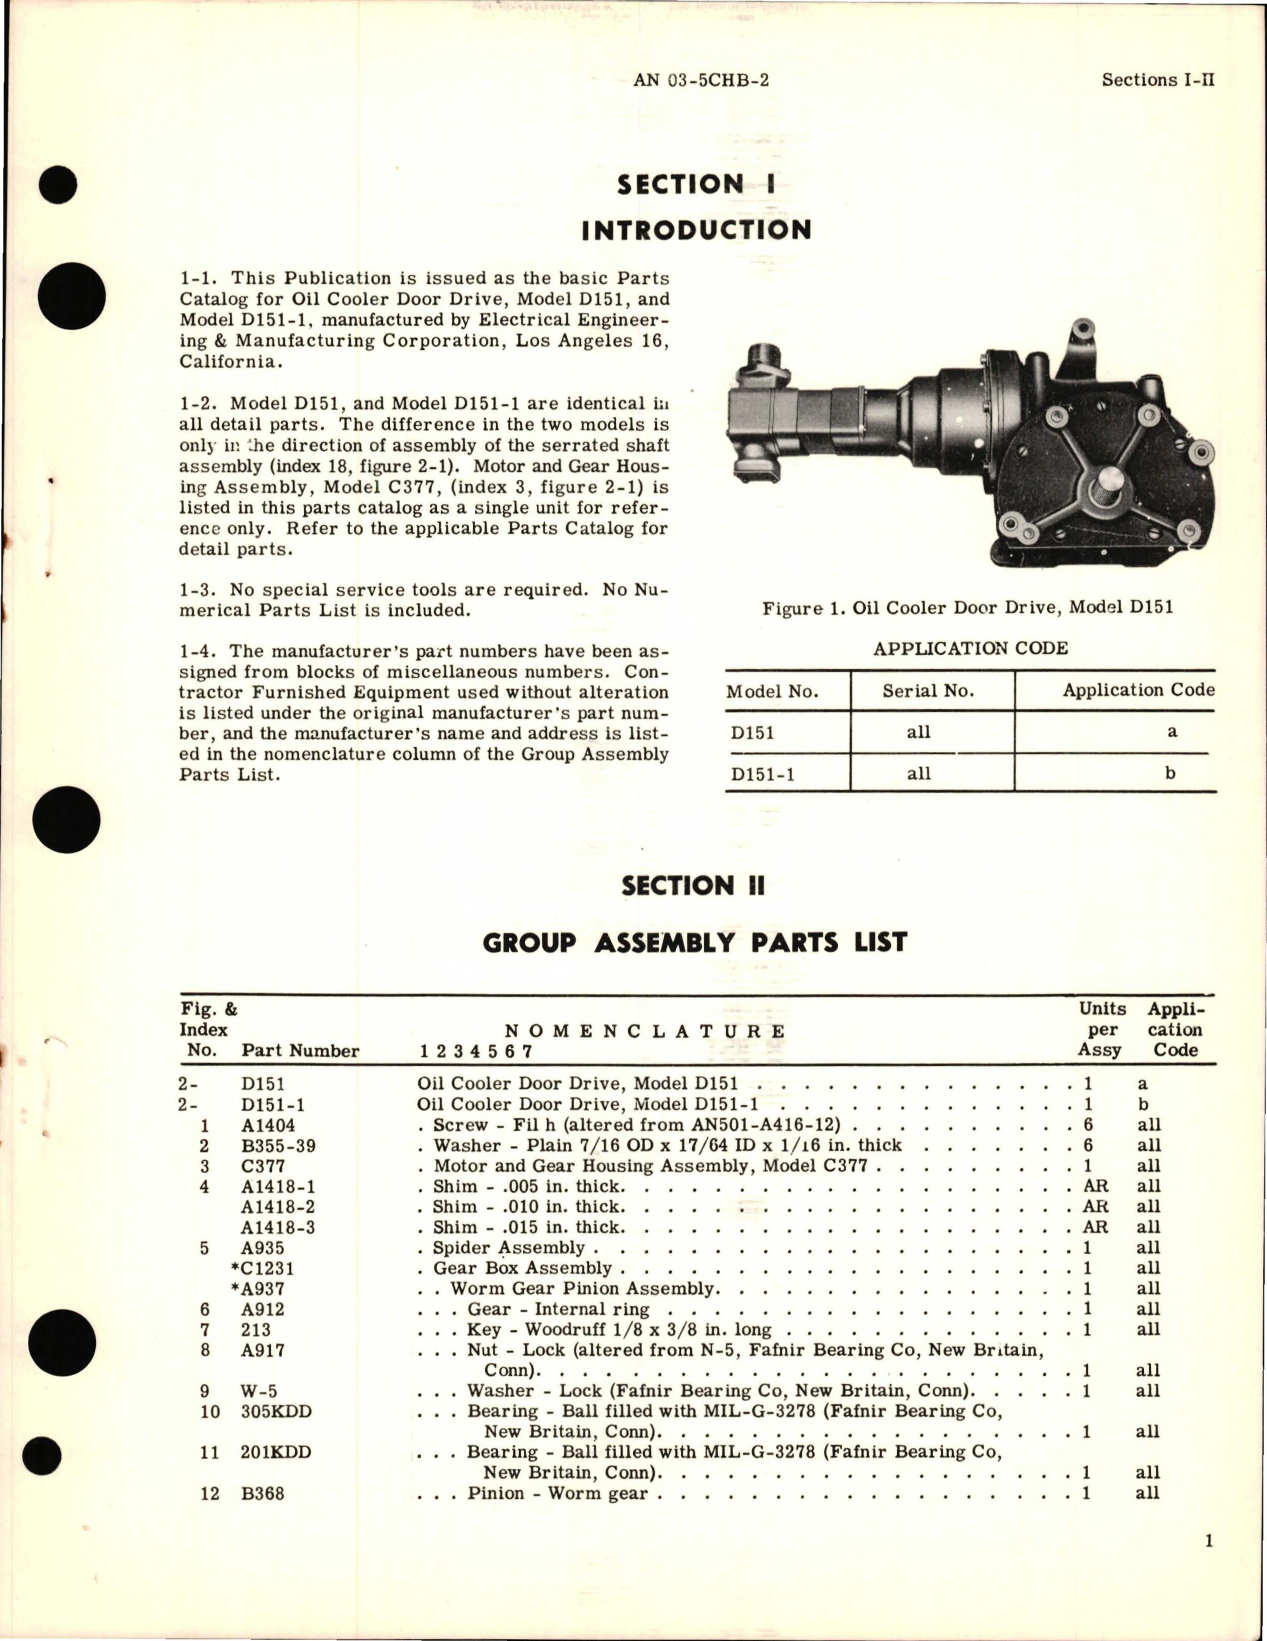 Sample page 5 from AirCorps Library document: Parts Catalog for Oil Cooler Door Drive - Models D151 and D151-1